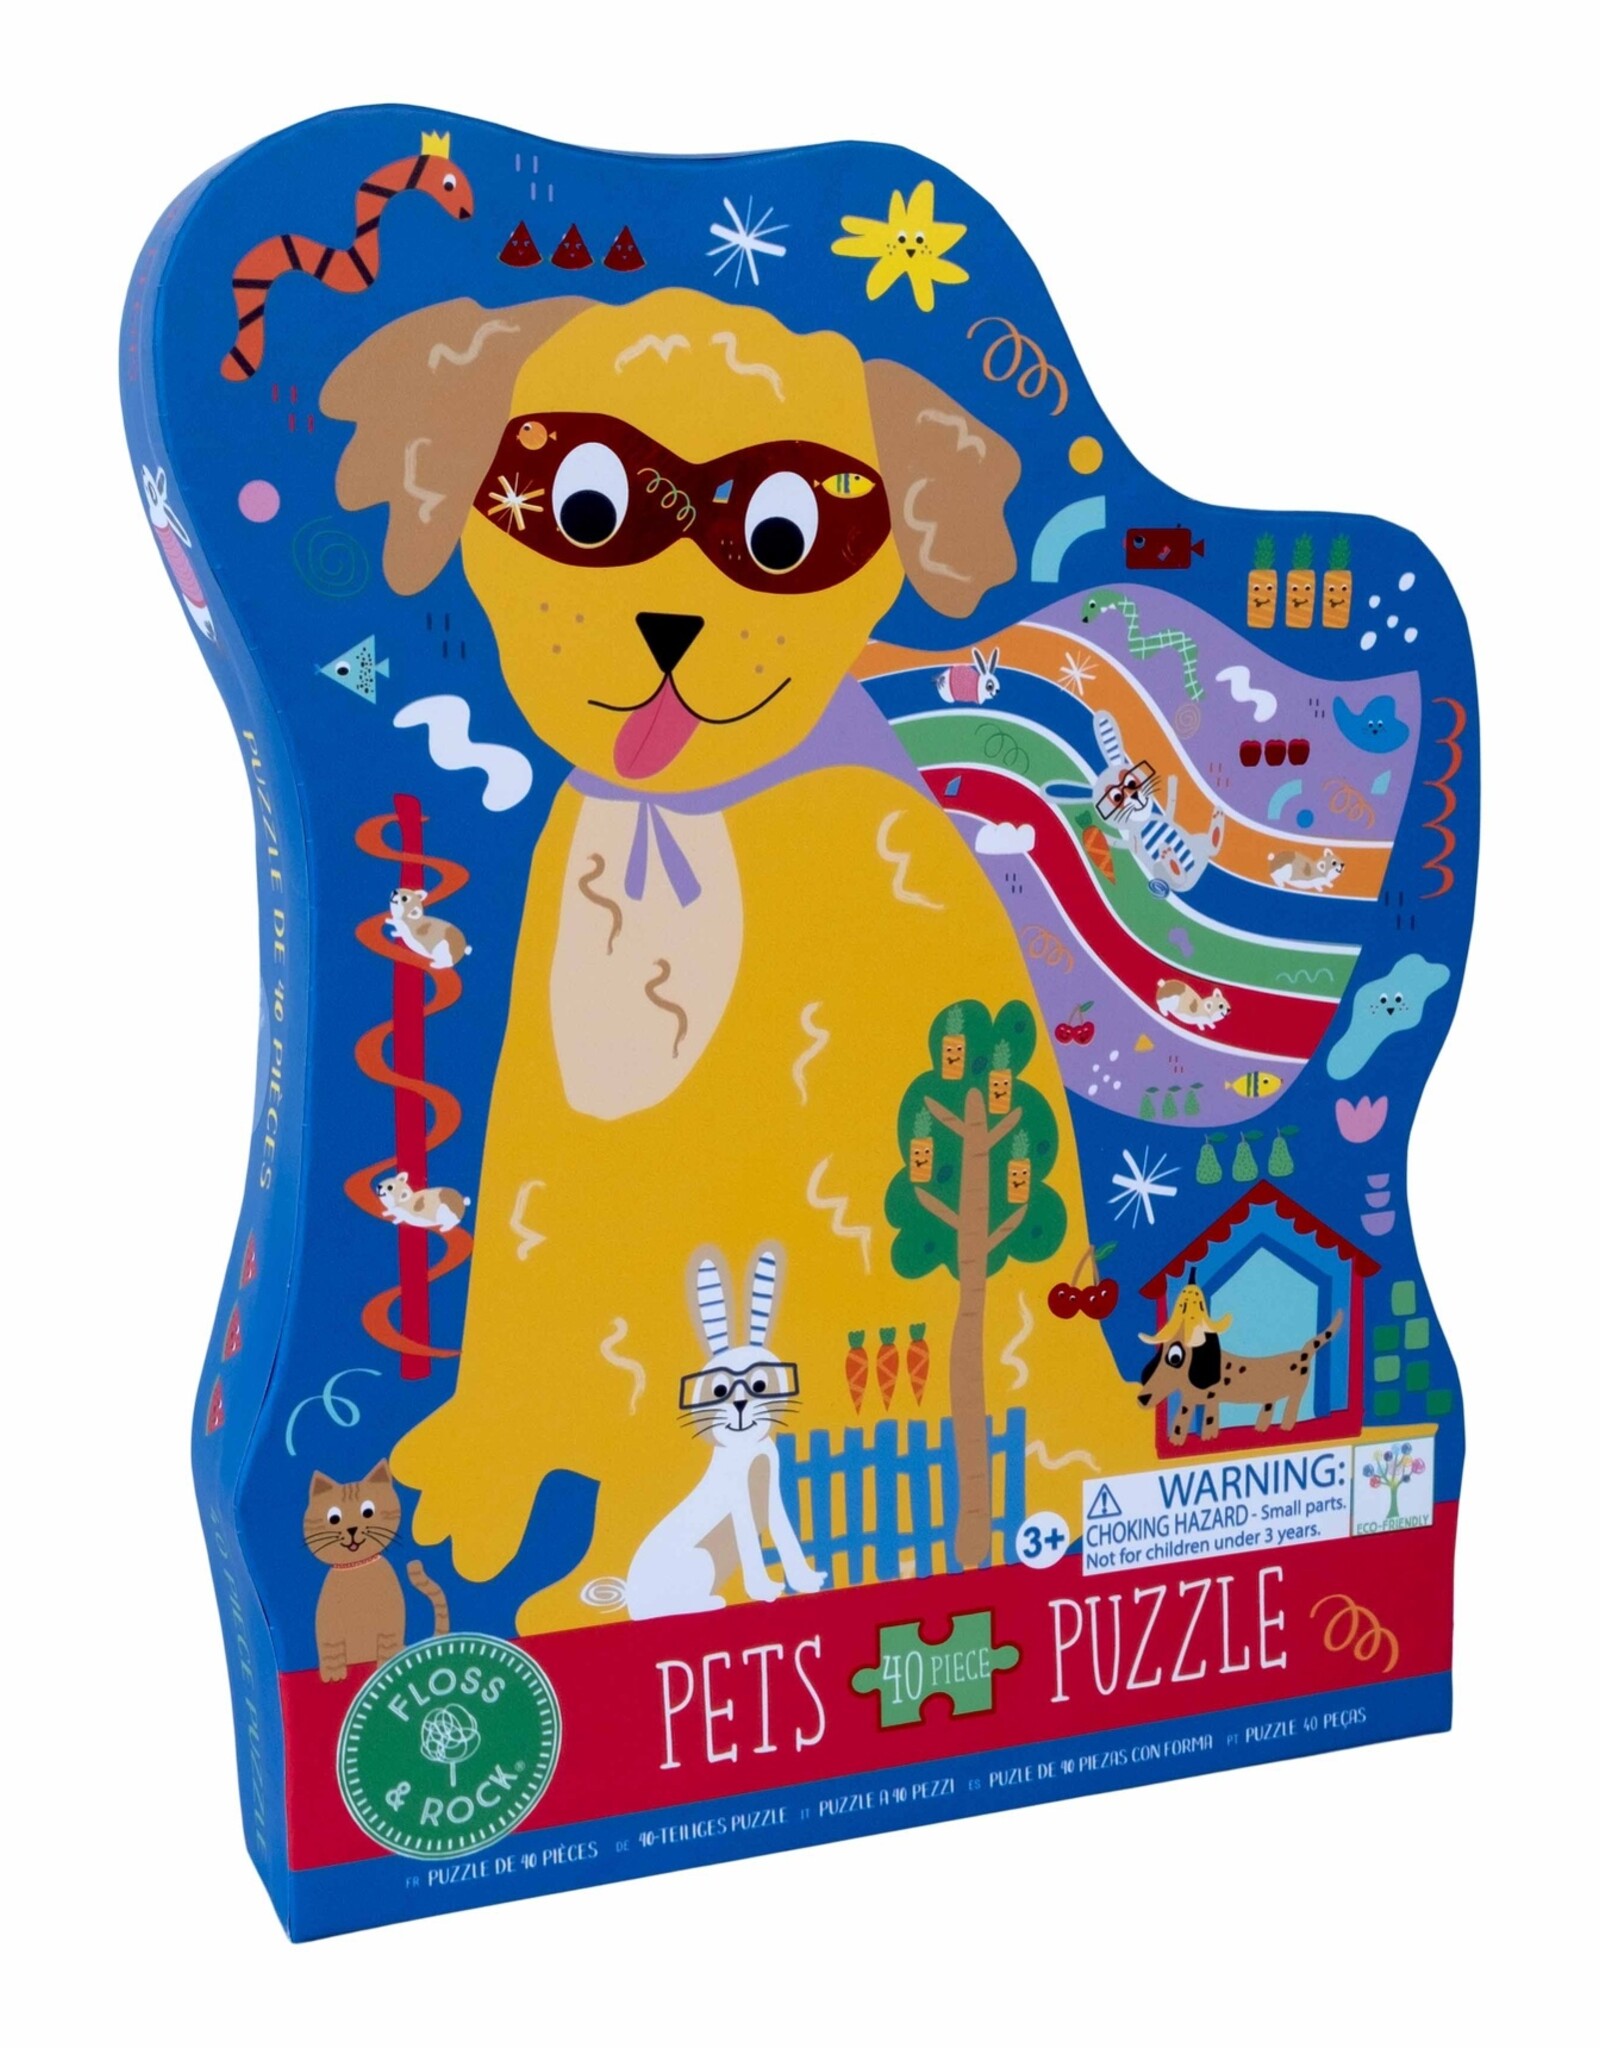 Floss and Rock Pets "Super Dog" 40pc Puzzle